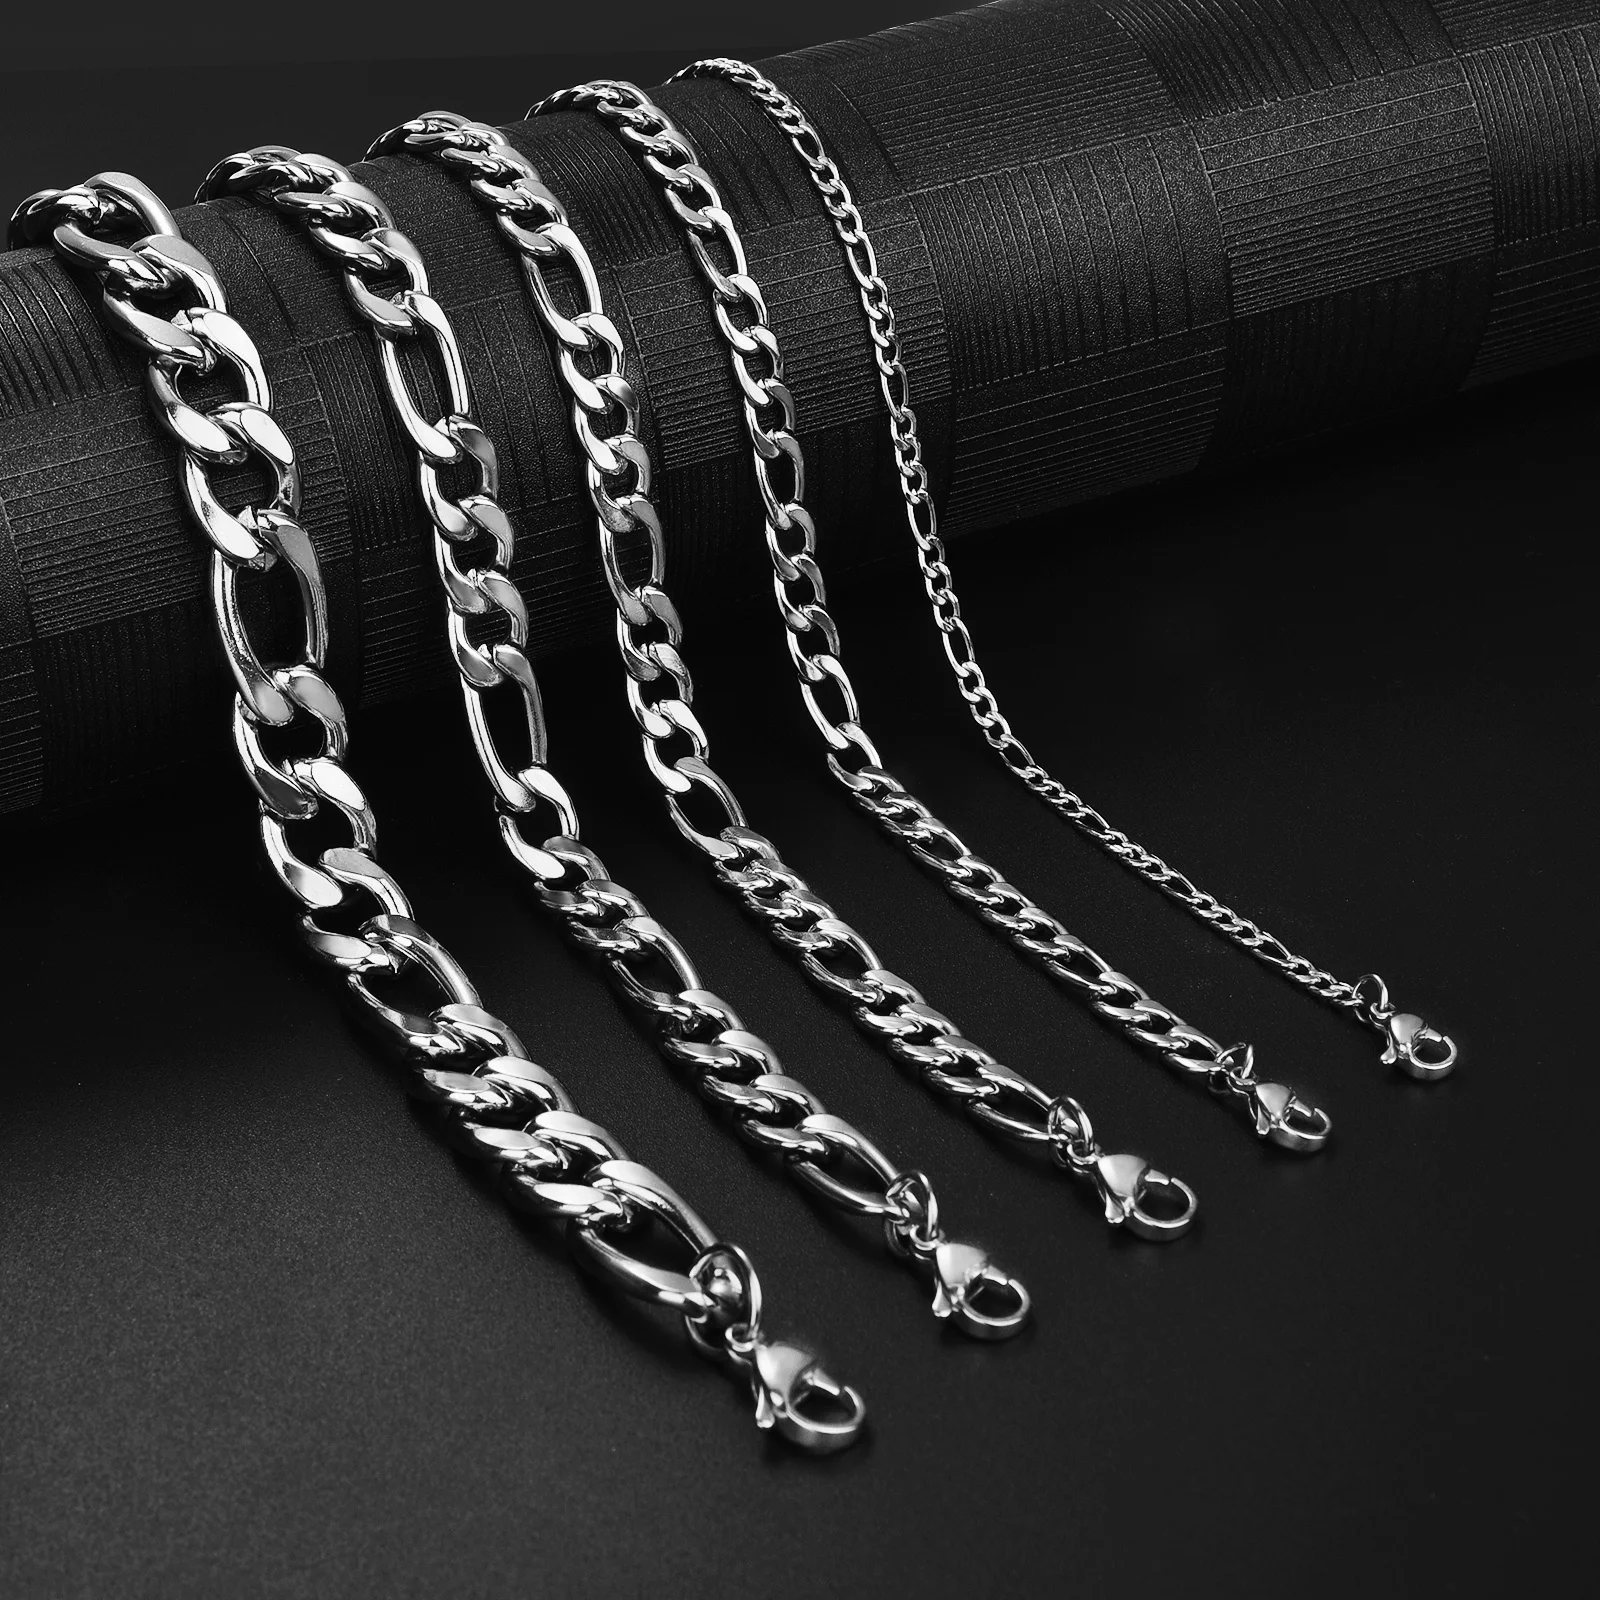 

Cuban Chain Necklace Men Simple 3-11mm Basic Punk Stainless Steel Curb 3:1NK Chain Chokers Vintage Gold Tone Solid Metal Collar